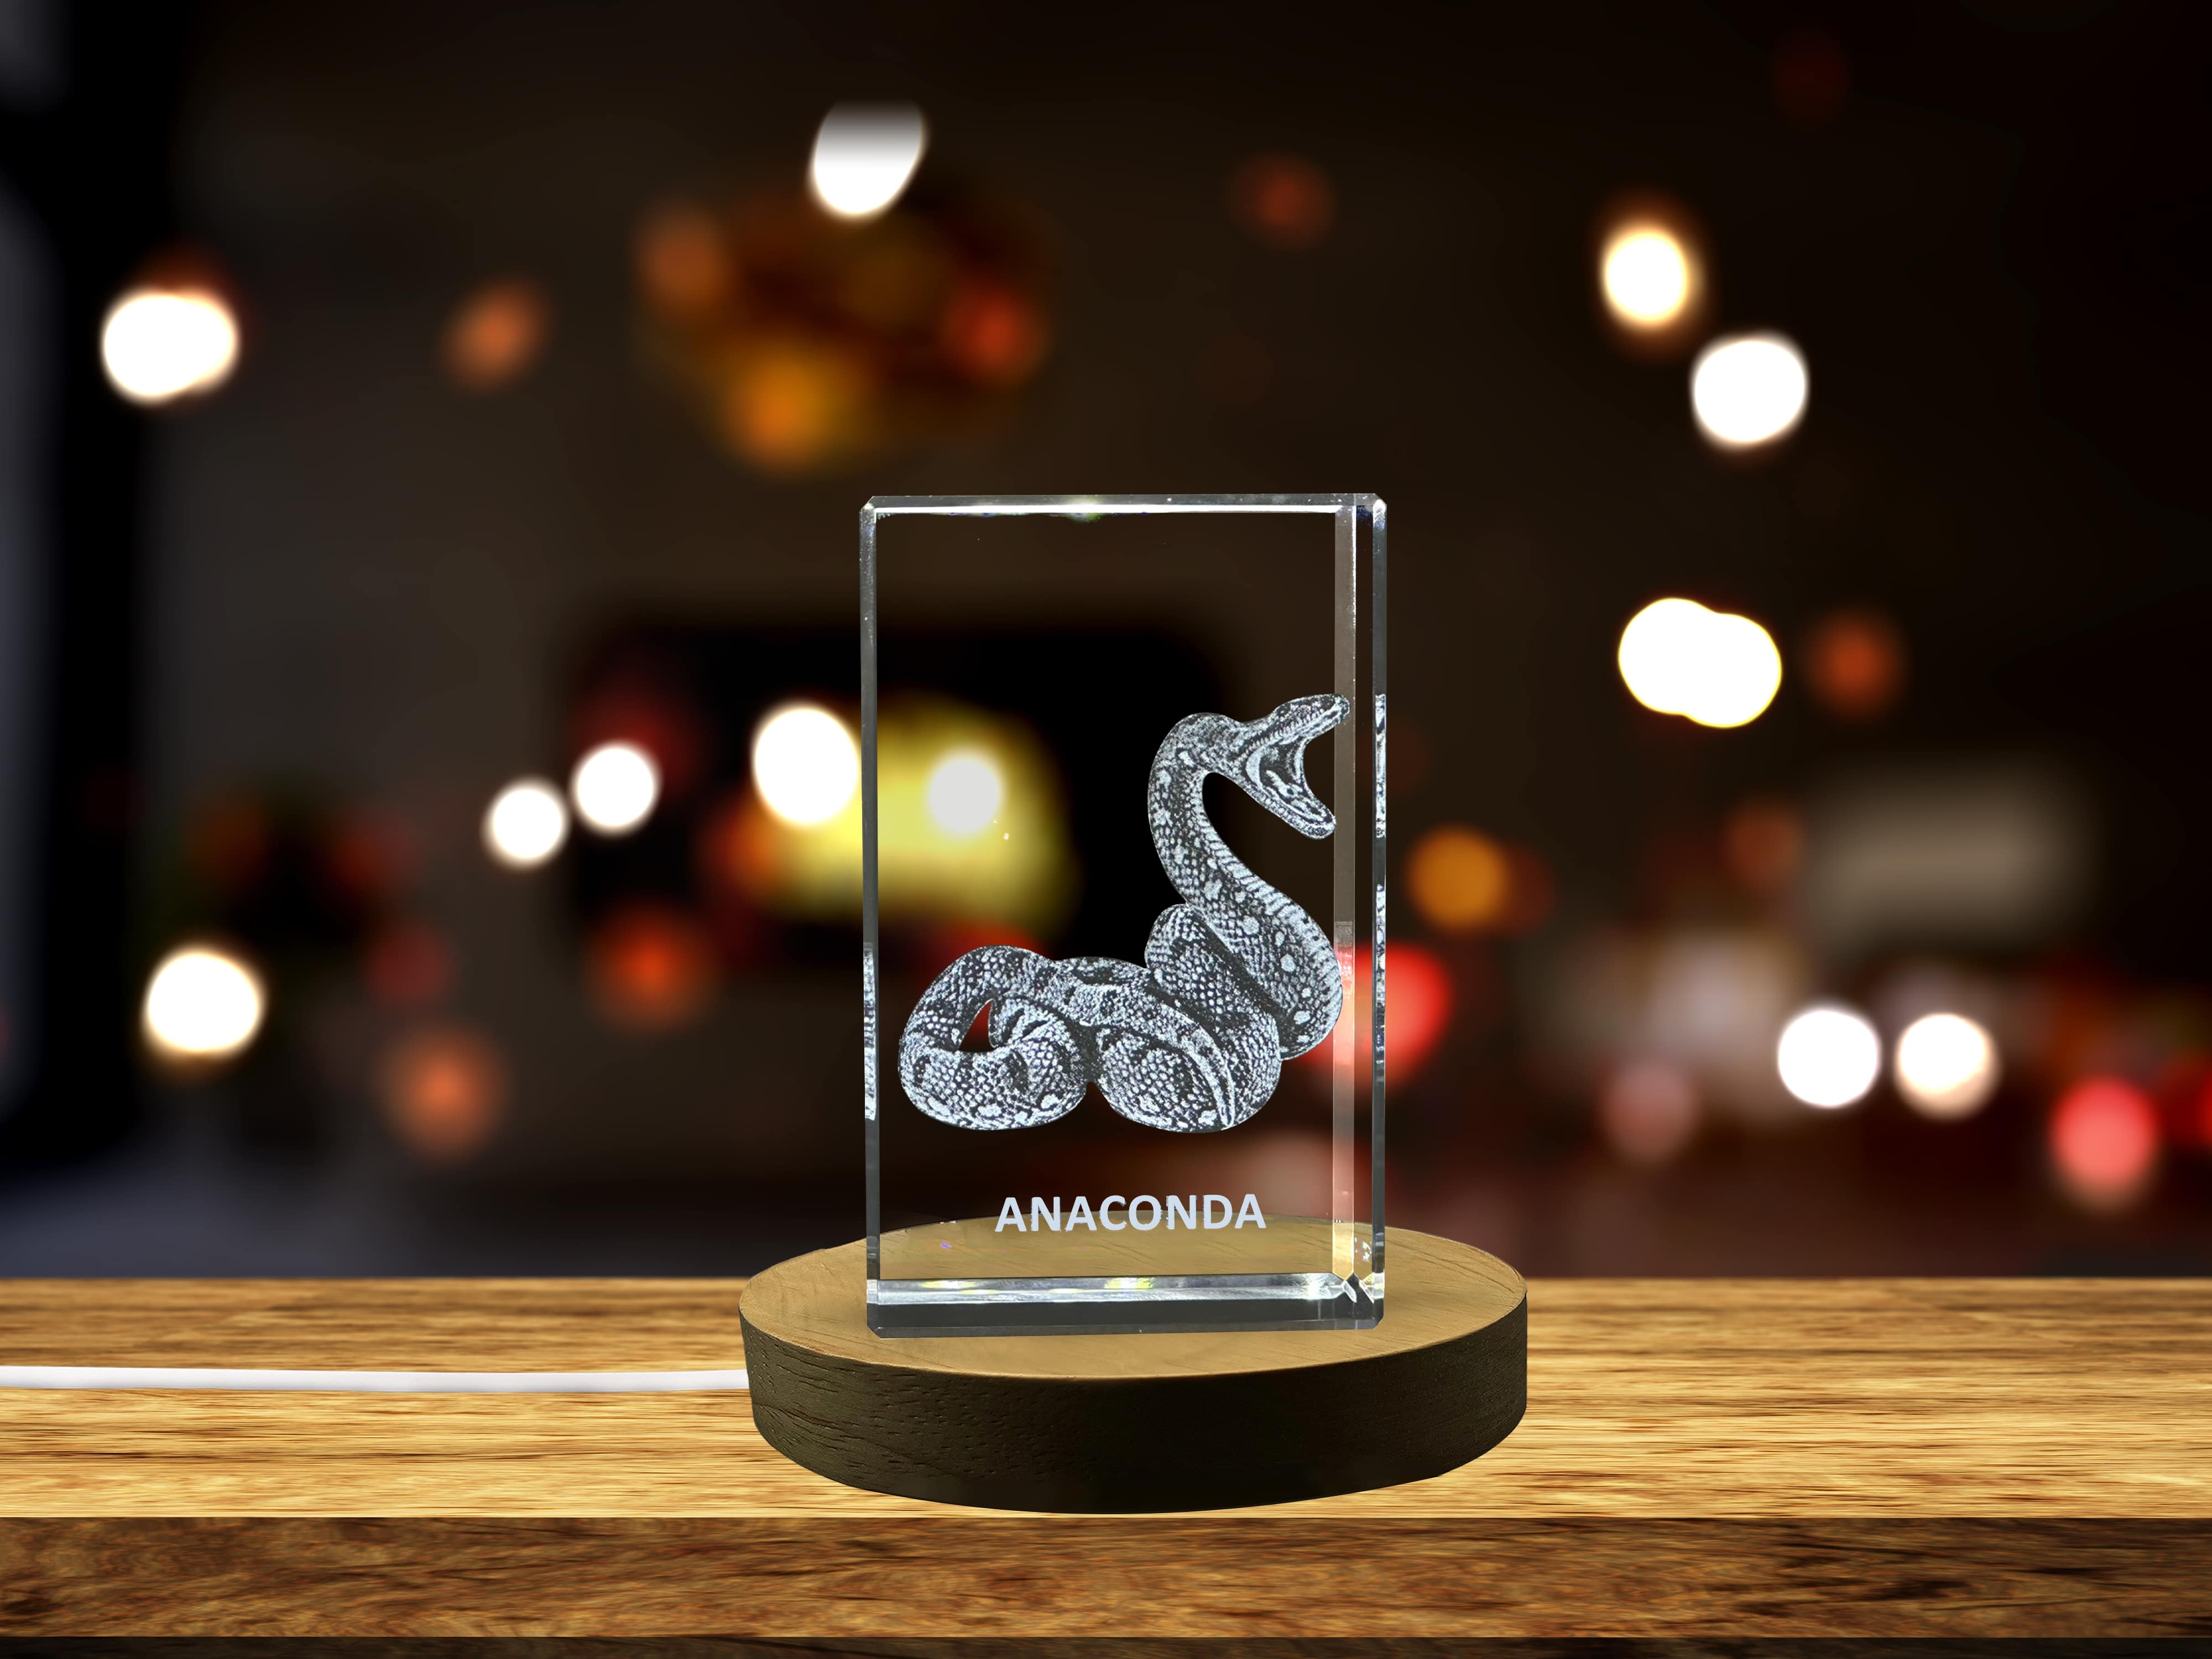 Unique 3D Engraved Crystal with Anaconda Design - Perfect Gift for Reptile Lovers A&B Crystal Collection